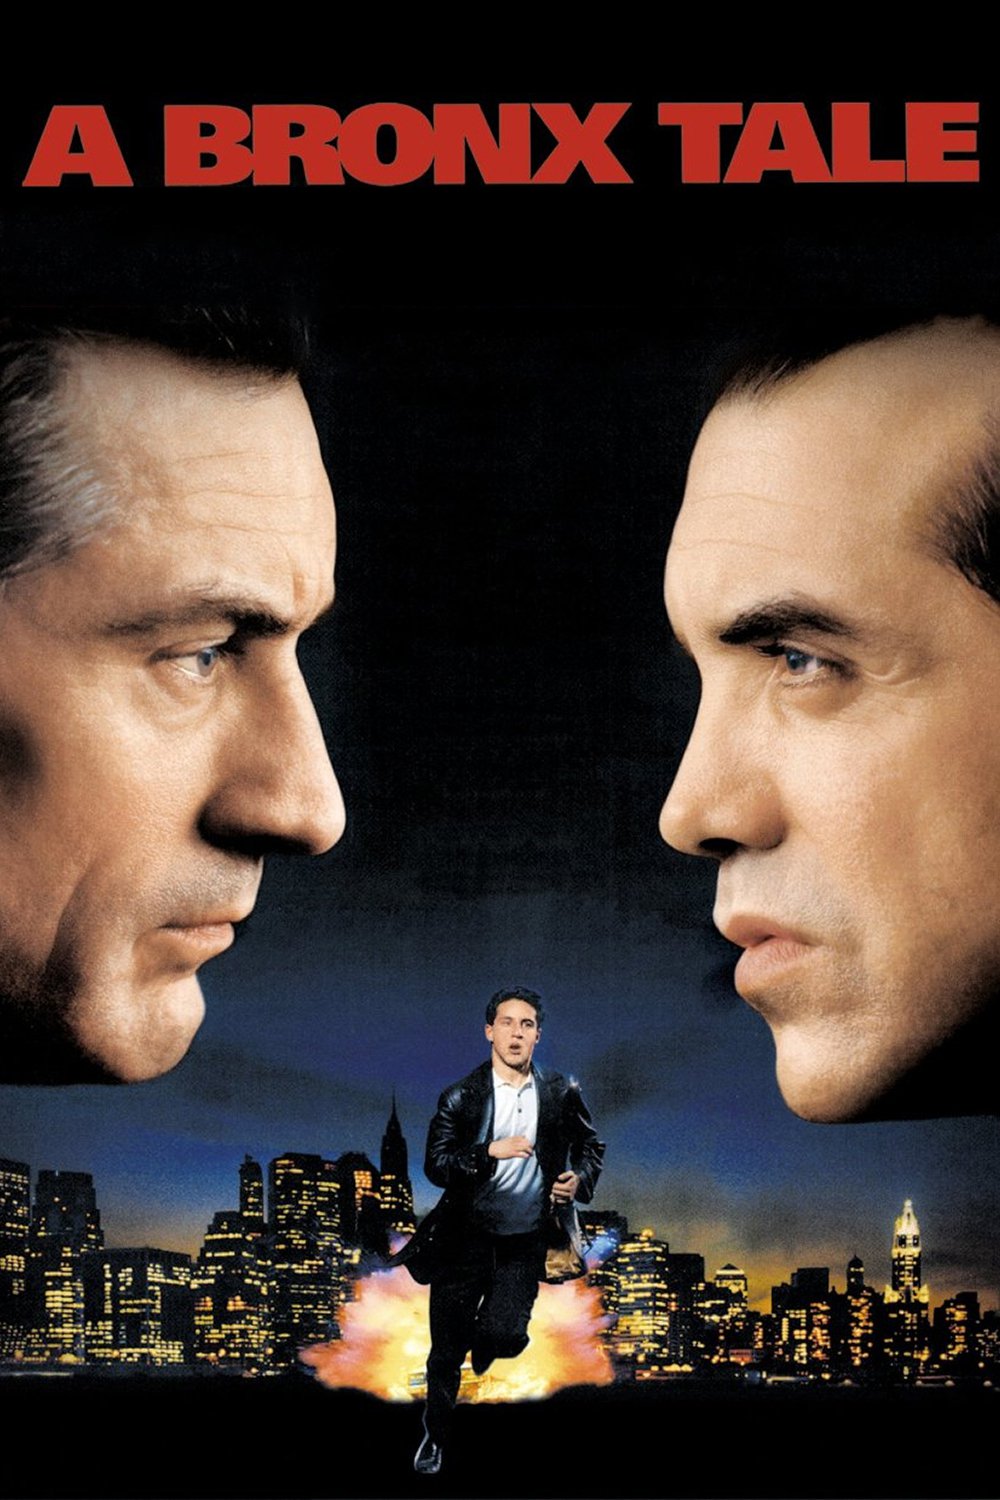 Movie poster 0f A Bronx Tale with Chaz Palminteri and Robert DiNiro of the film A Bronx Tale Screening with Chaz Palminteri